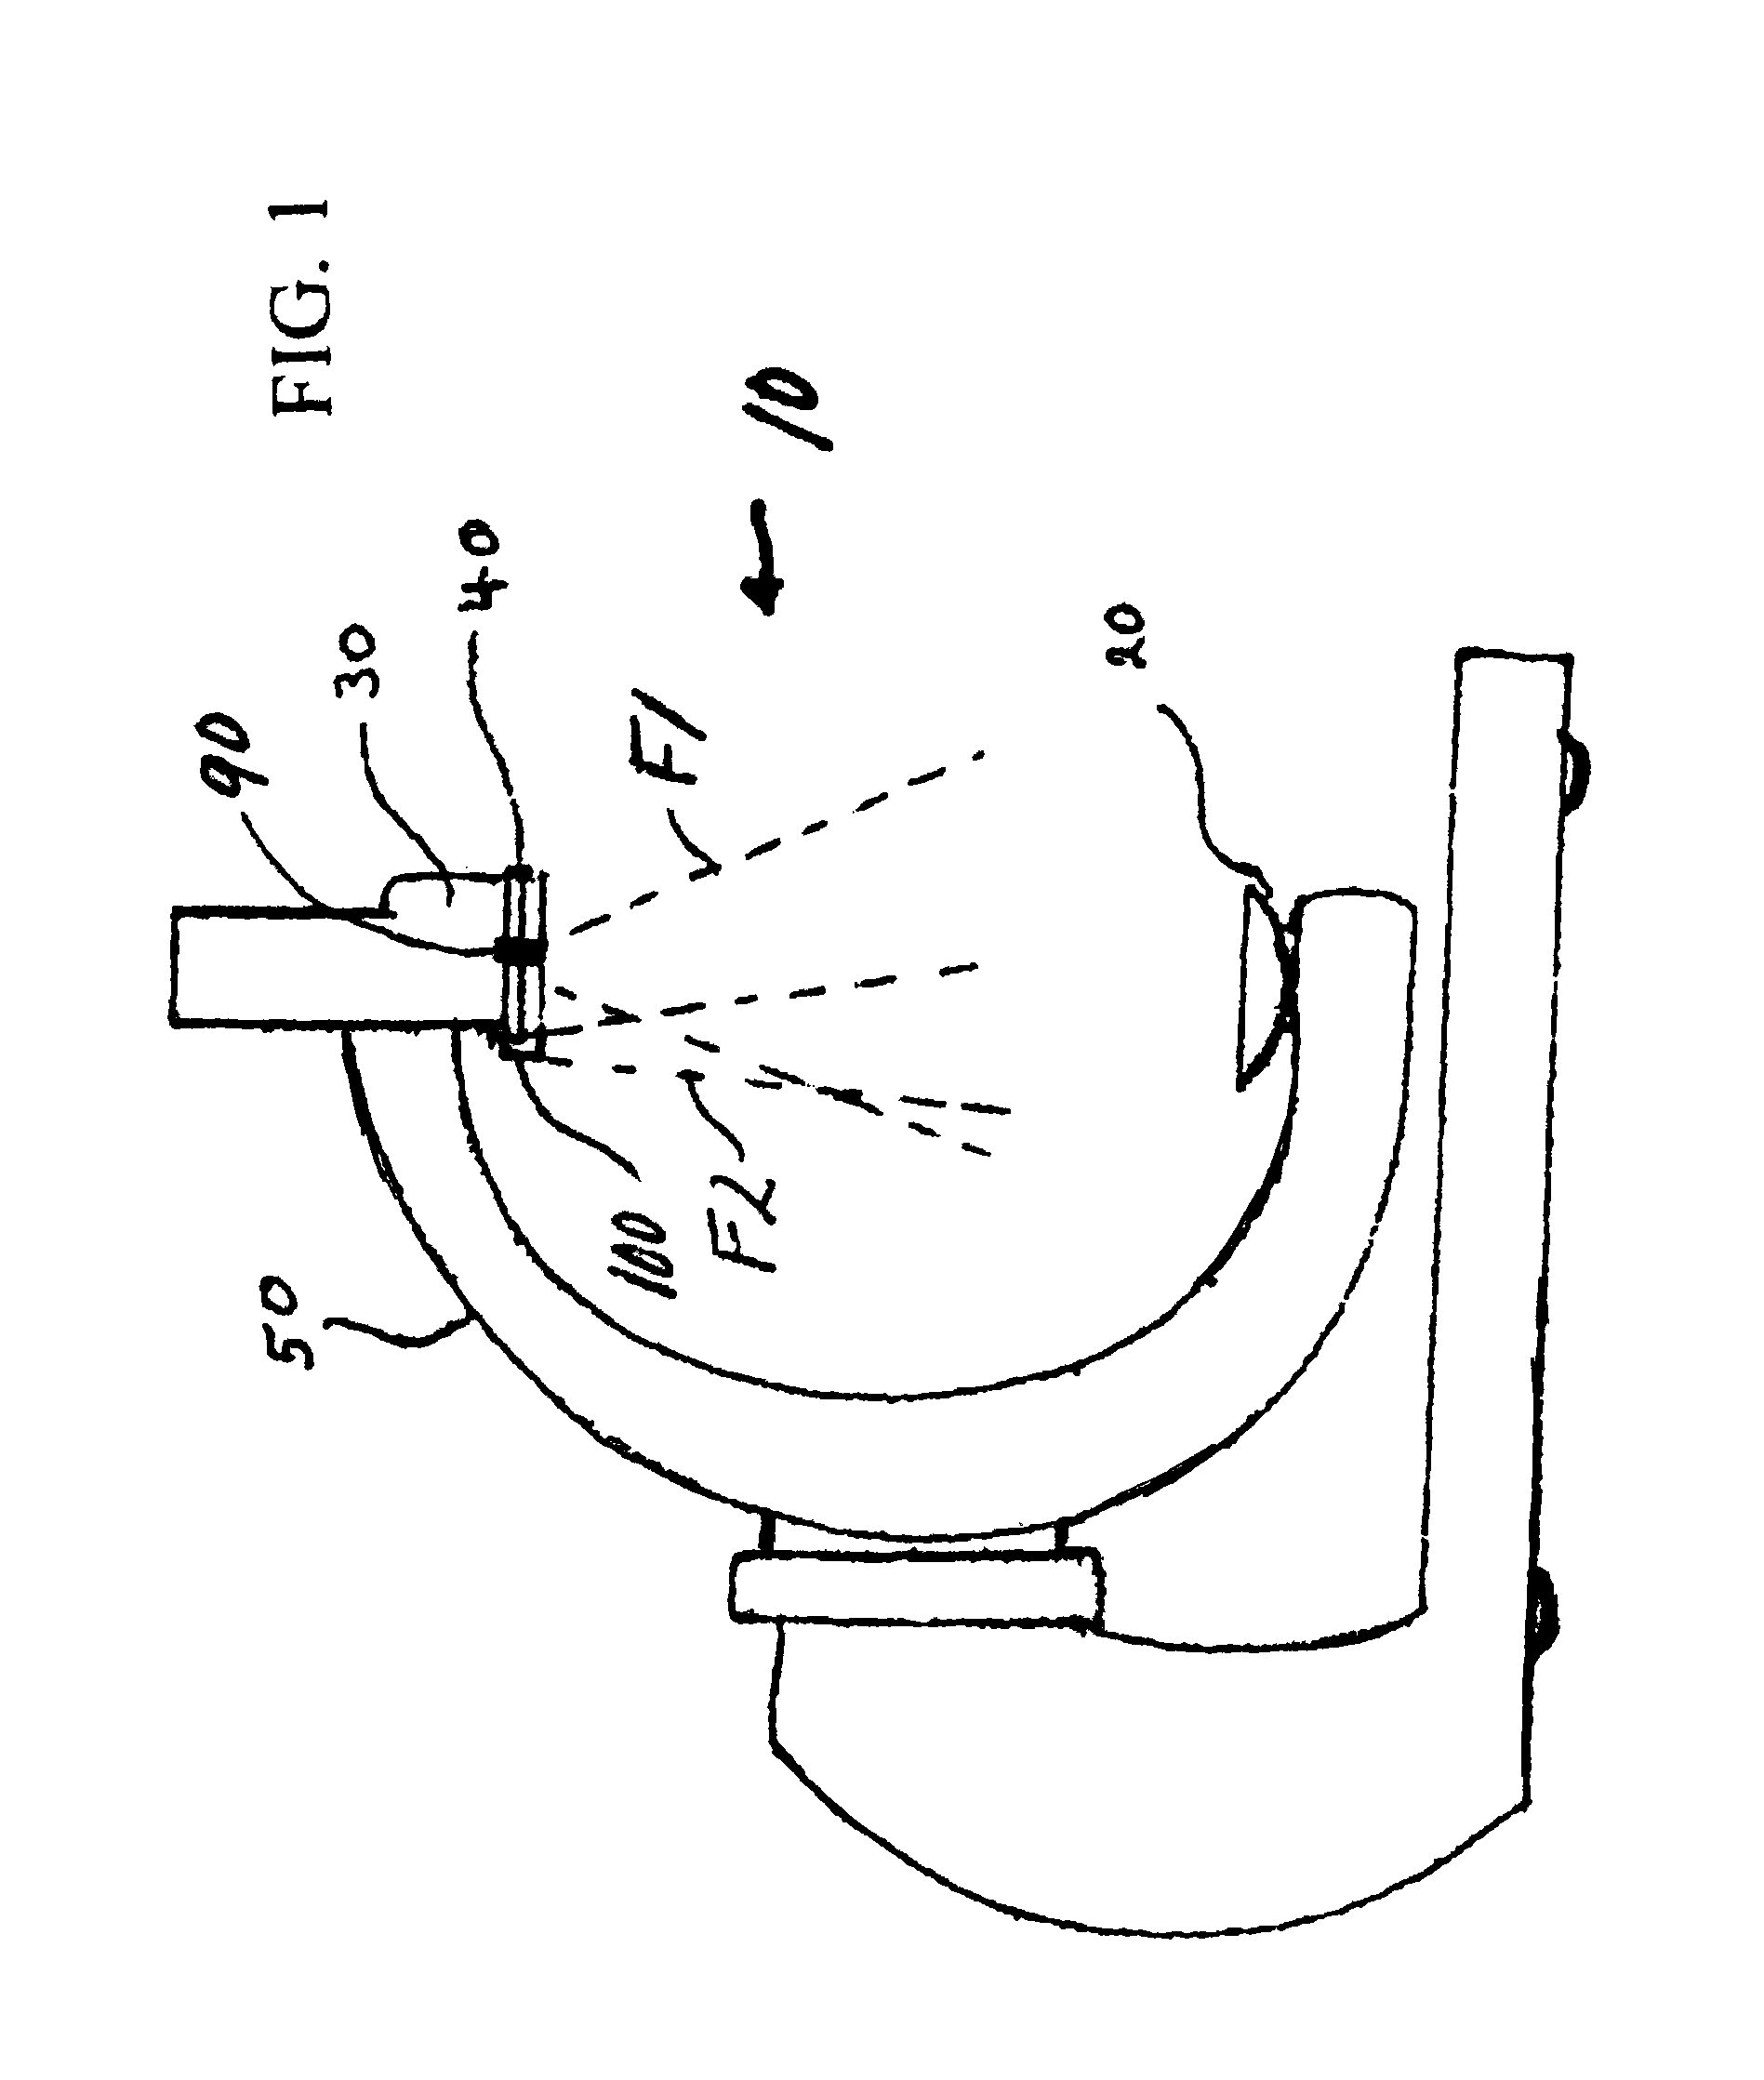 Targeting system for use with x-ray machines